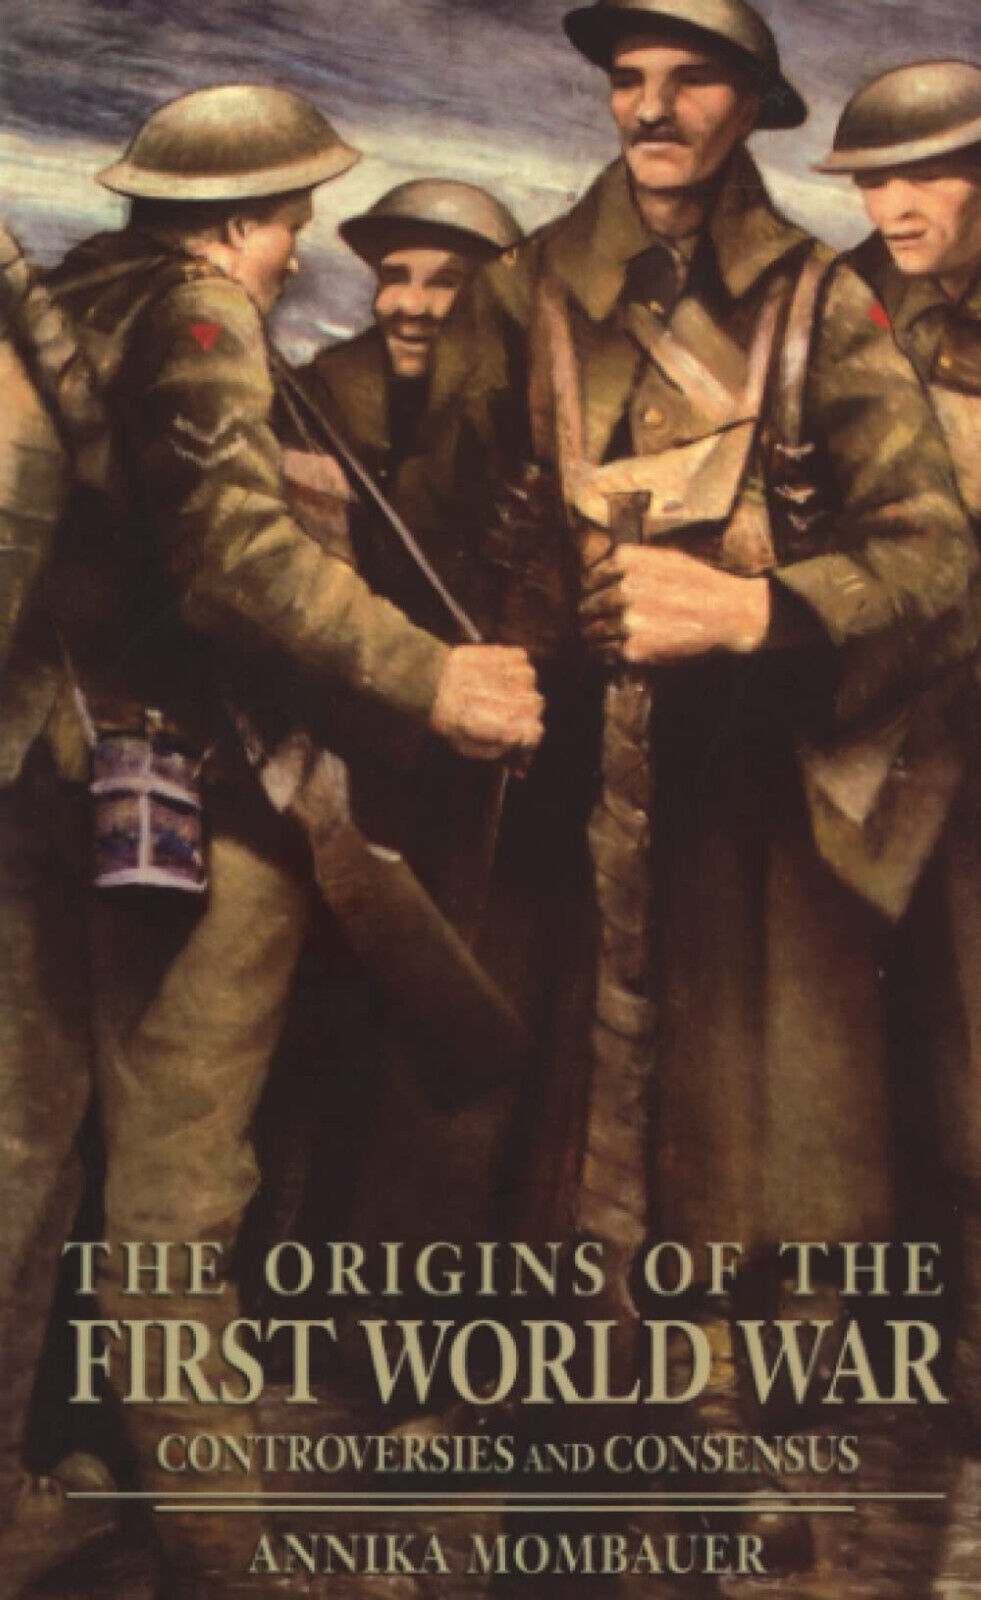 The Origins of the First World War - Annika Mombauer - Routledge, 2002